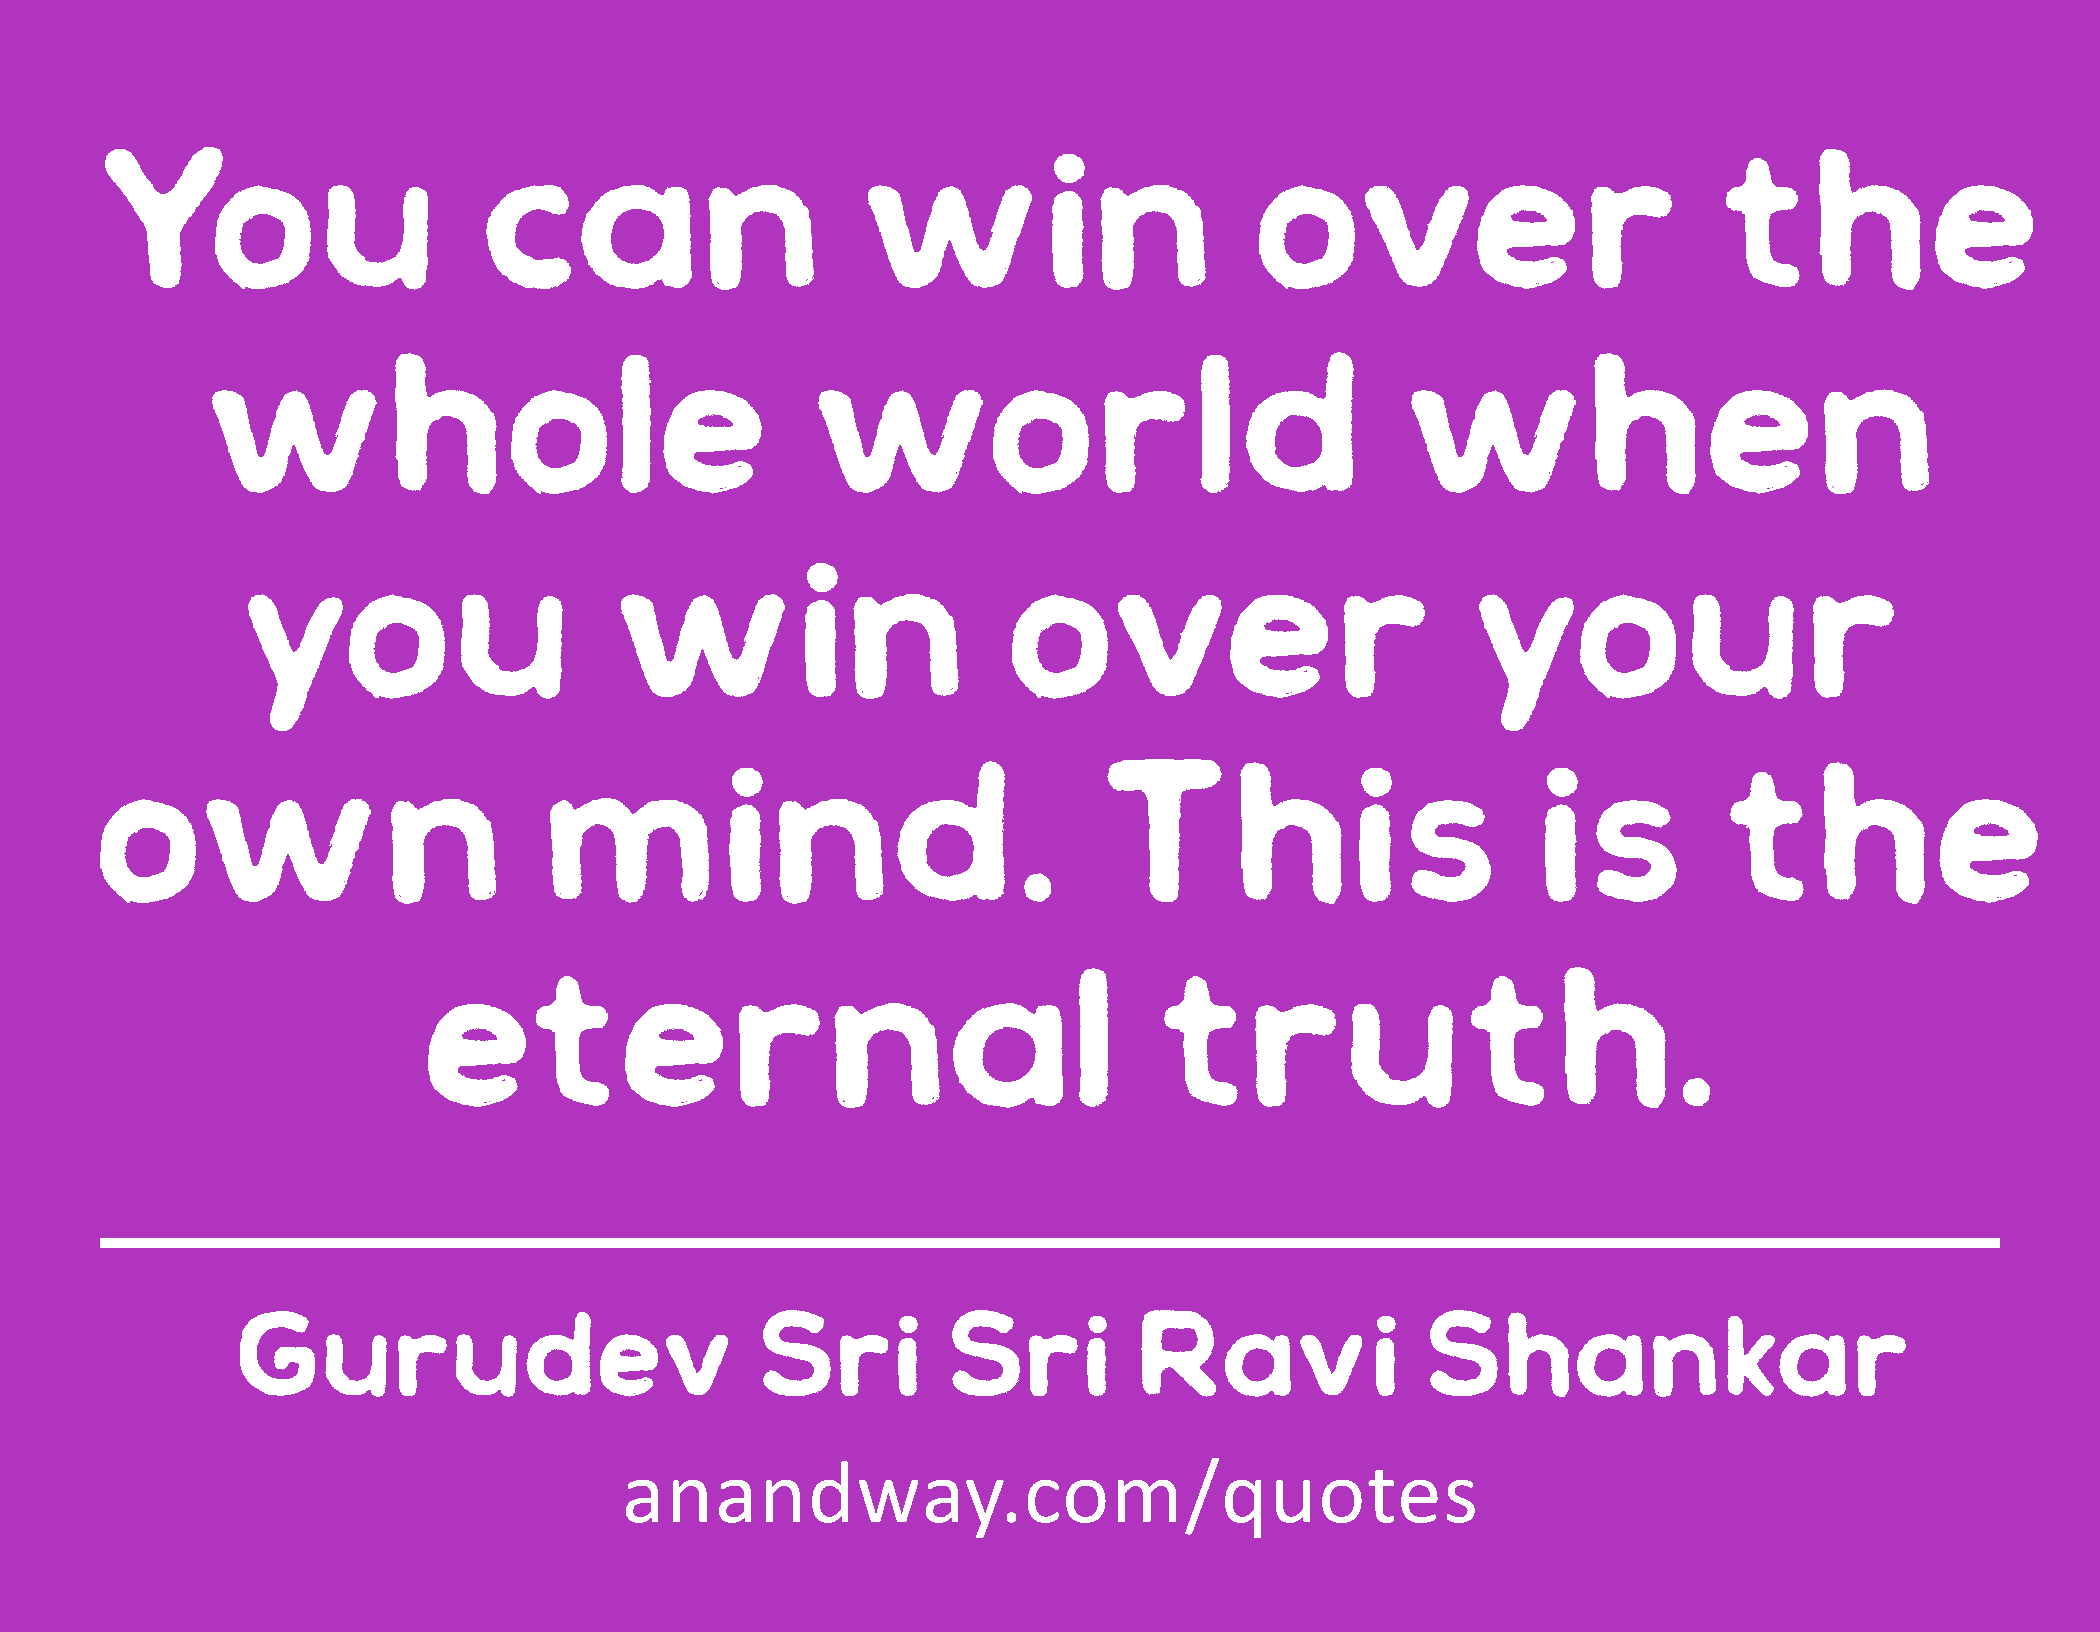 You can win over the whole world when you win over your own mind. This is the eternal truth.
 -Gurudev Sri Sri Ravi Shankar